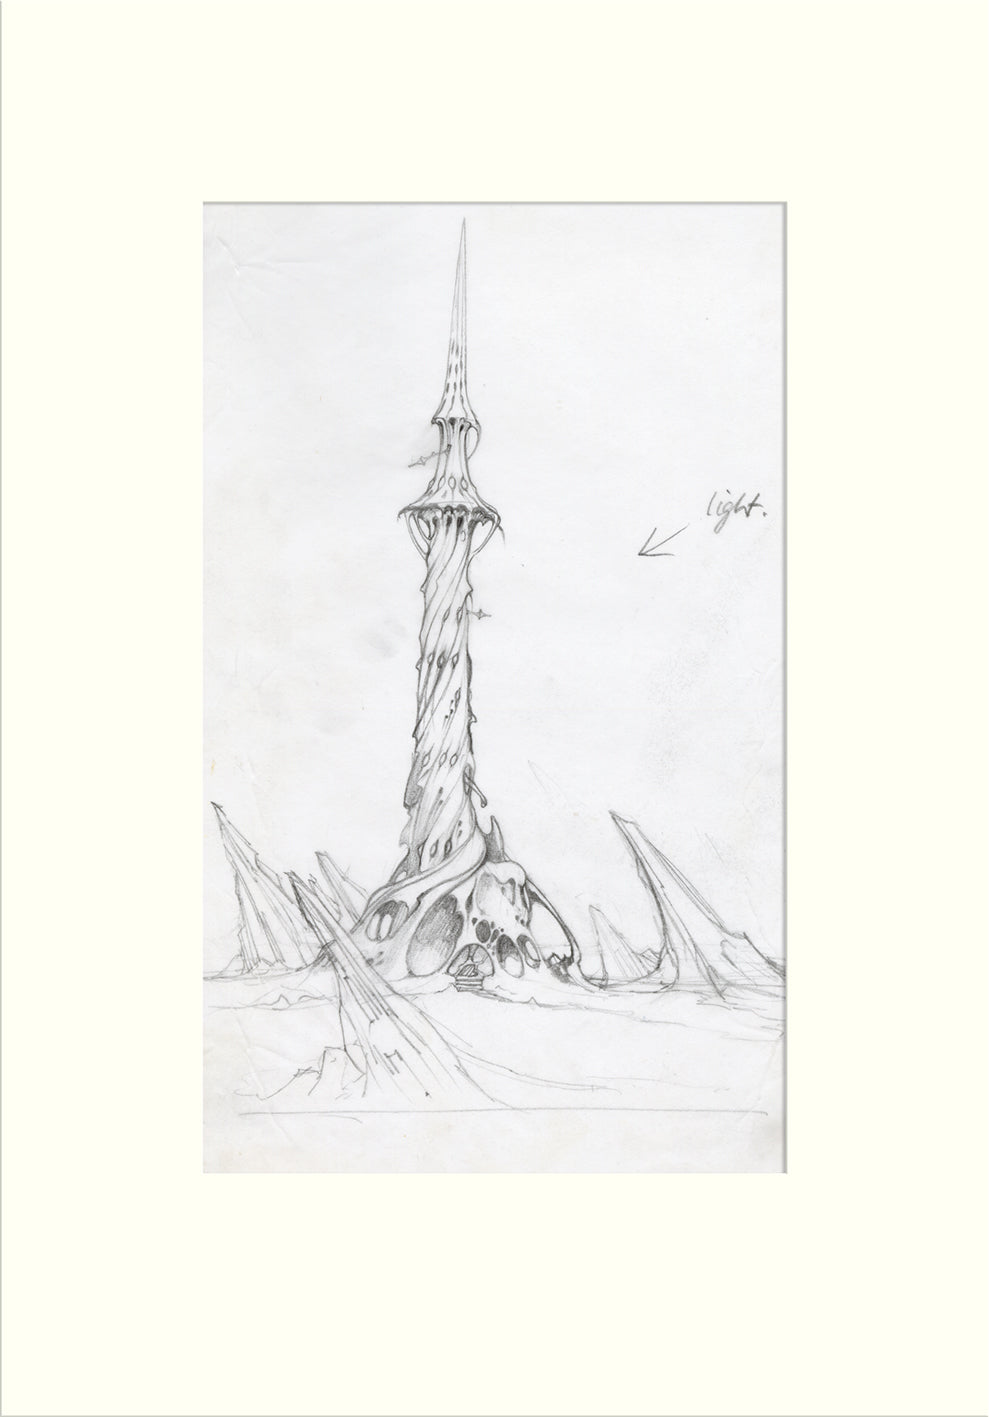 The Twilight Tower - Preliminary II pencil drawing by Rodney Matthews